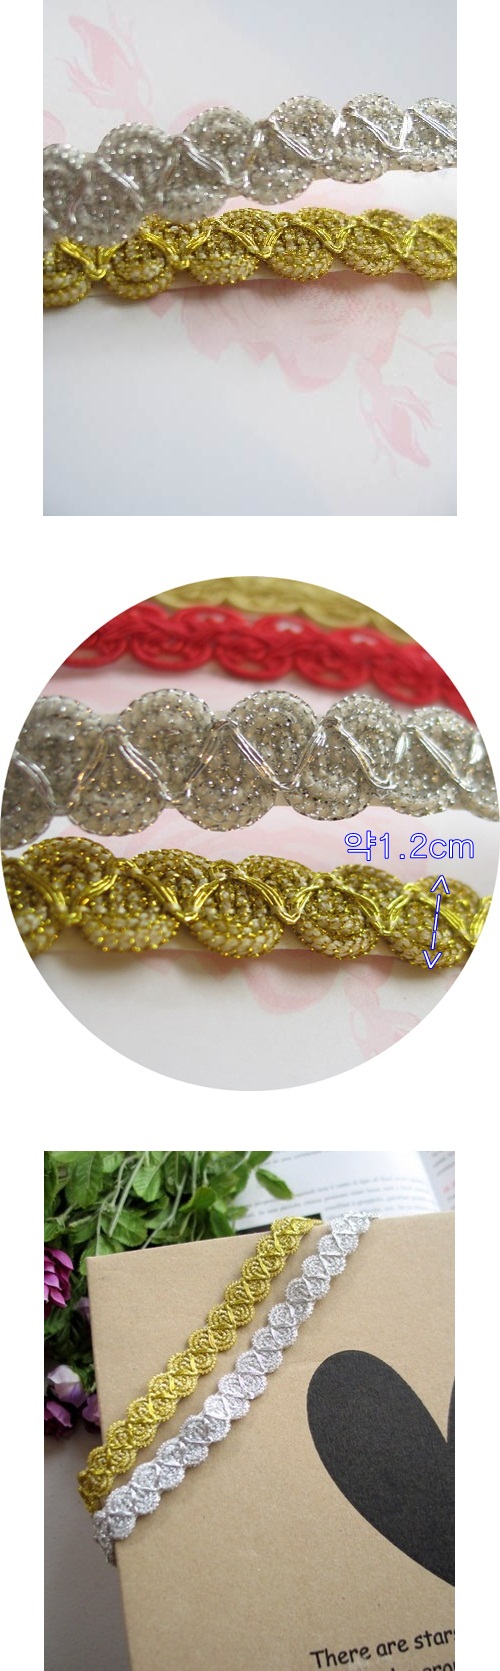 2015-1-20_____Silver Gold Lace.jpg